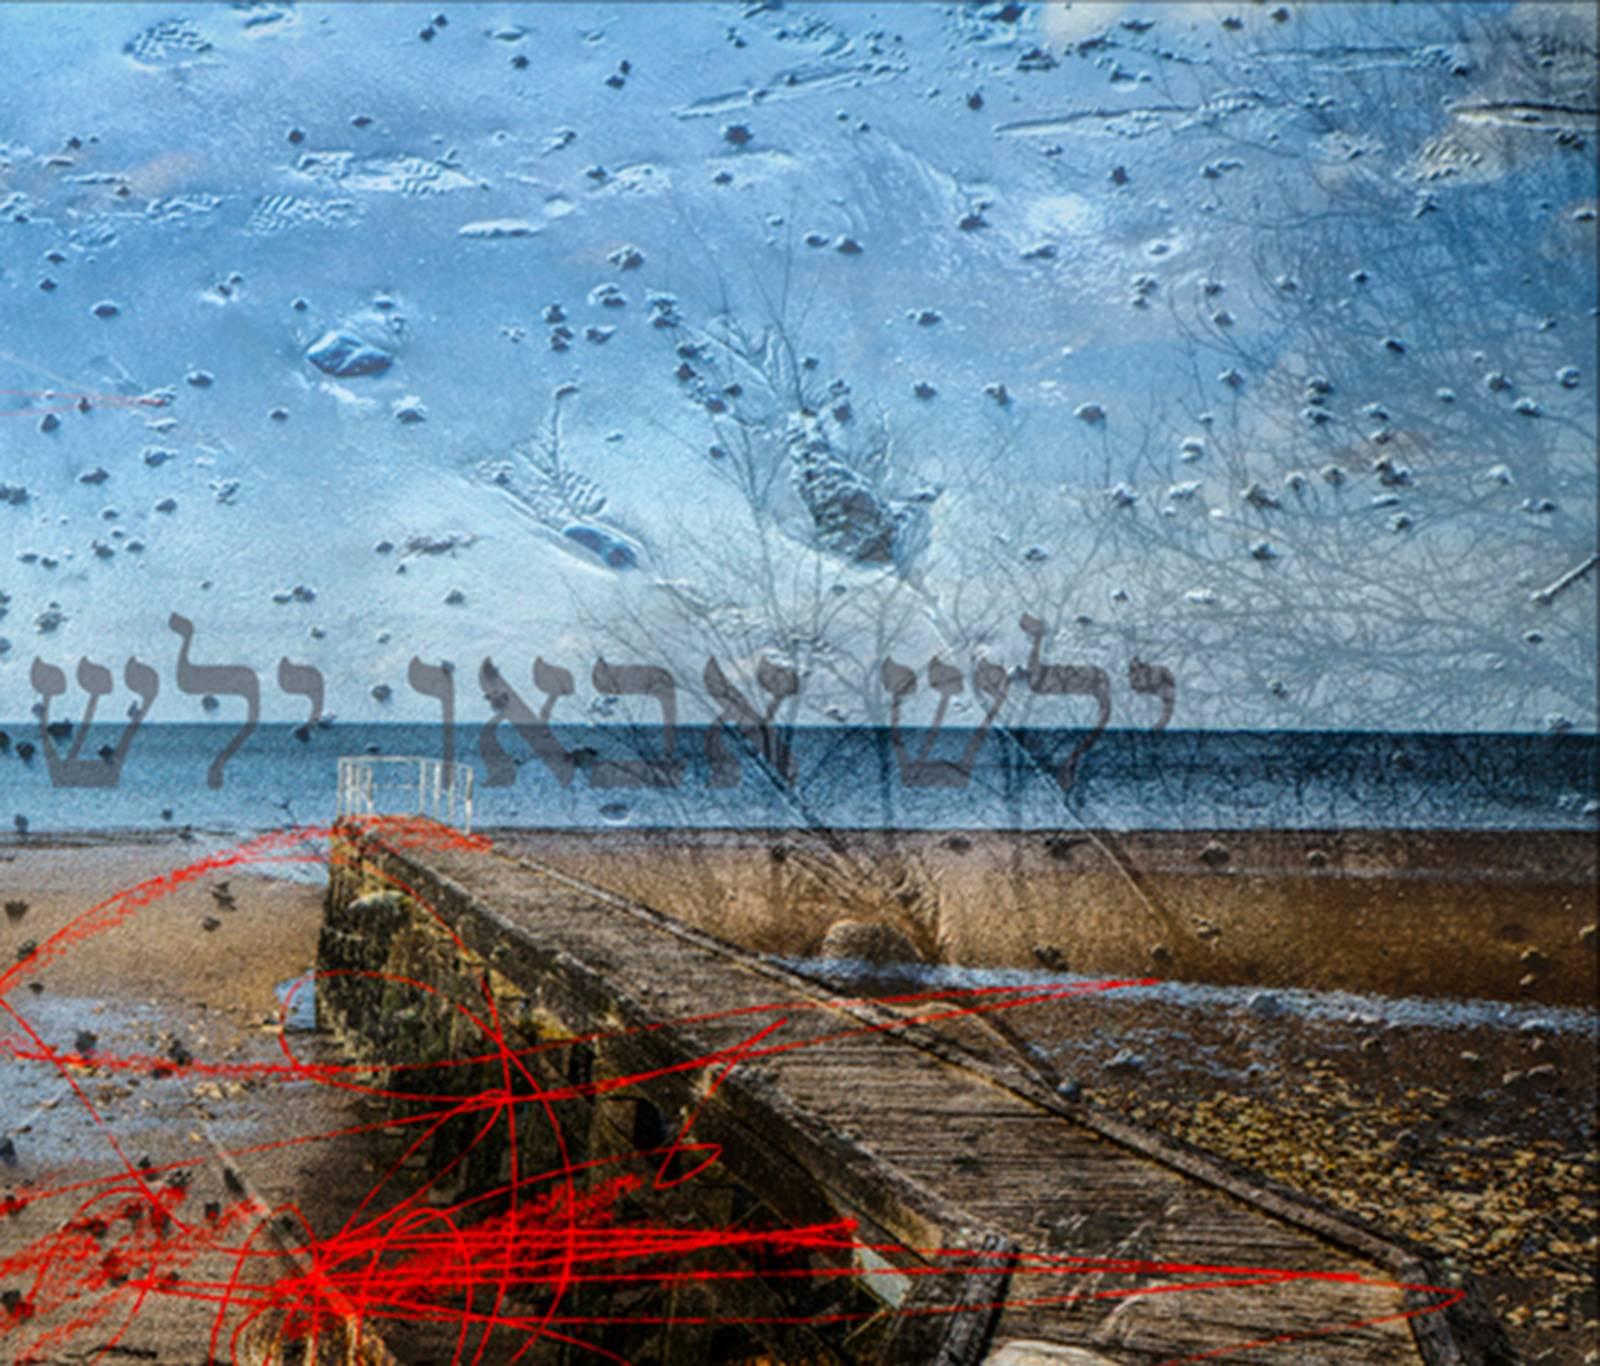 This photography is a mix of a fashion editorial photo shoot, approaching the theme of family: a story about twins, footsteps on a low tide timeless beach of the Independence Day. The Hebrew letters referring to the Jewish History say «To my Mother